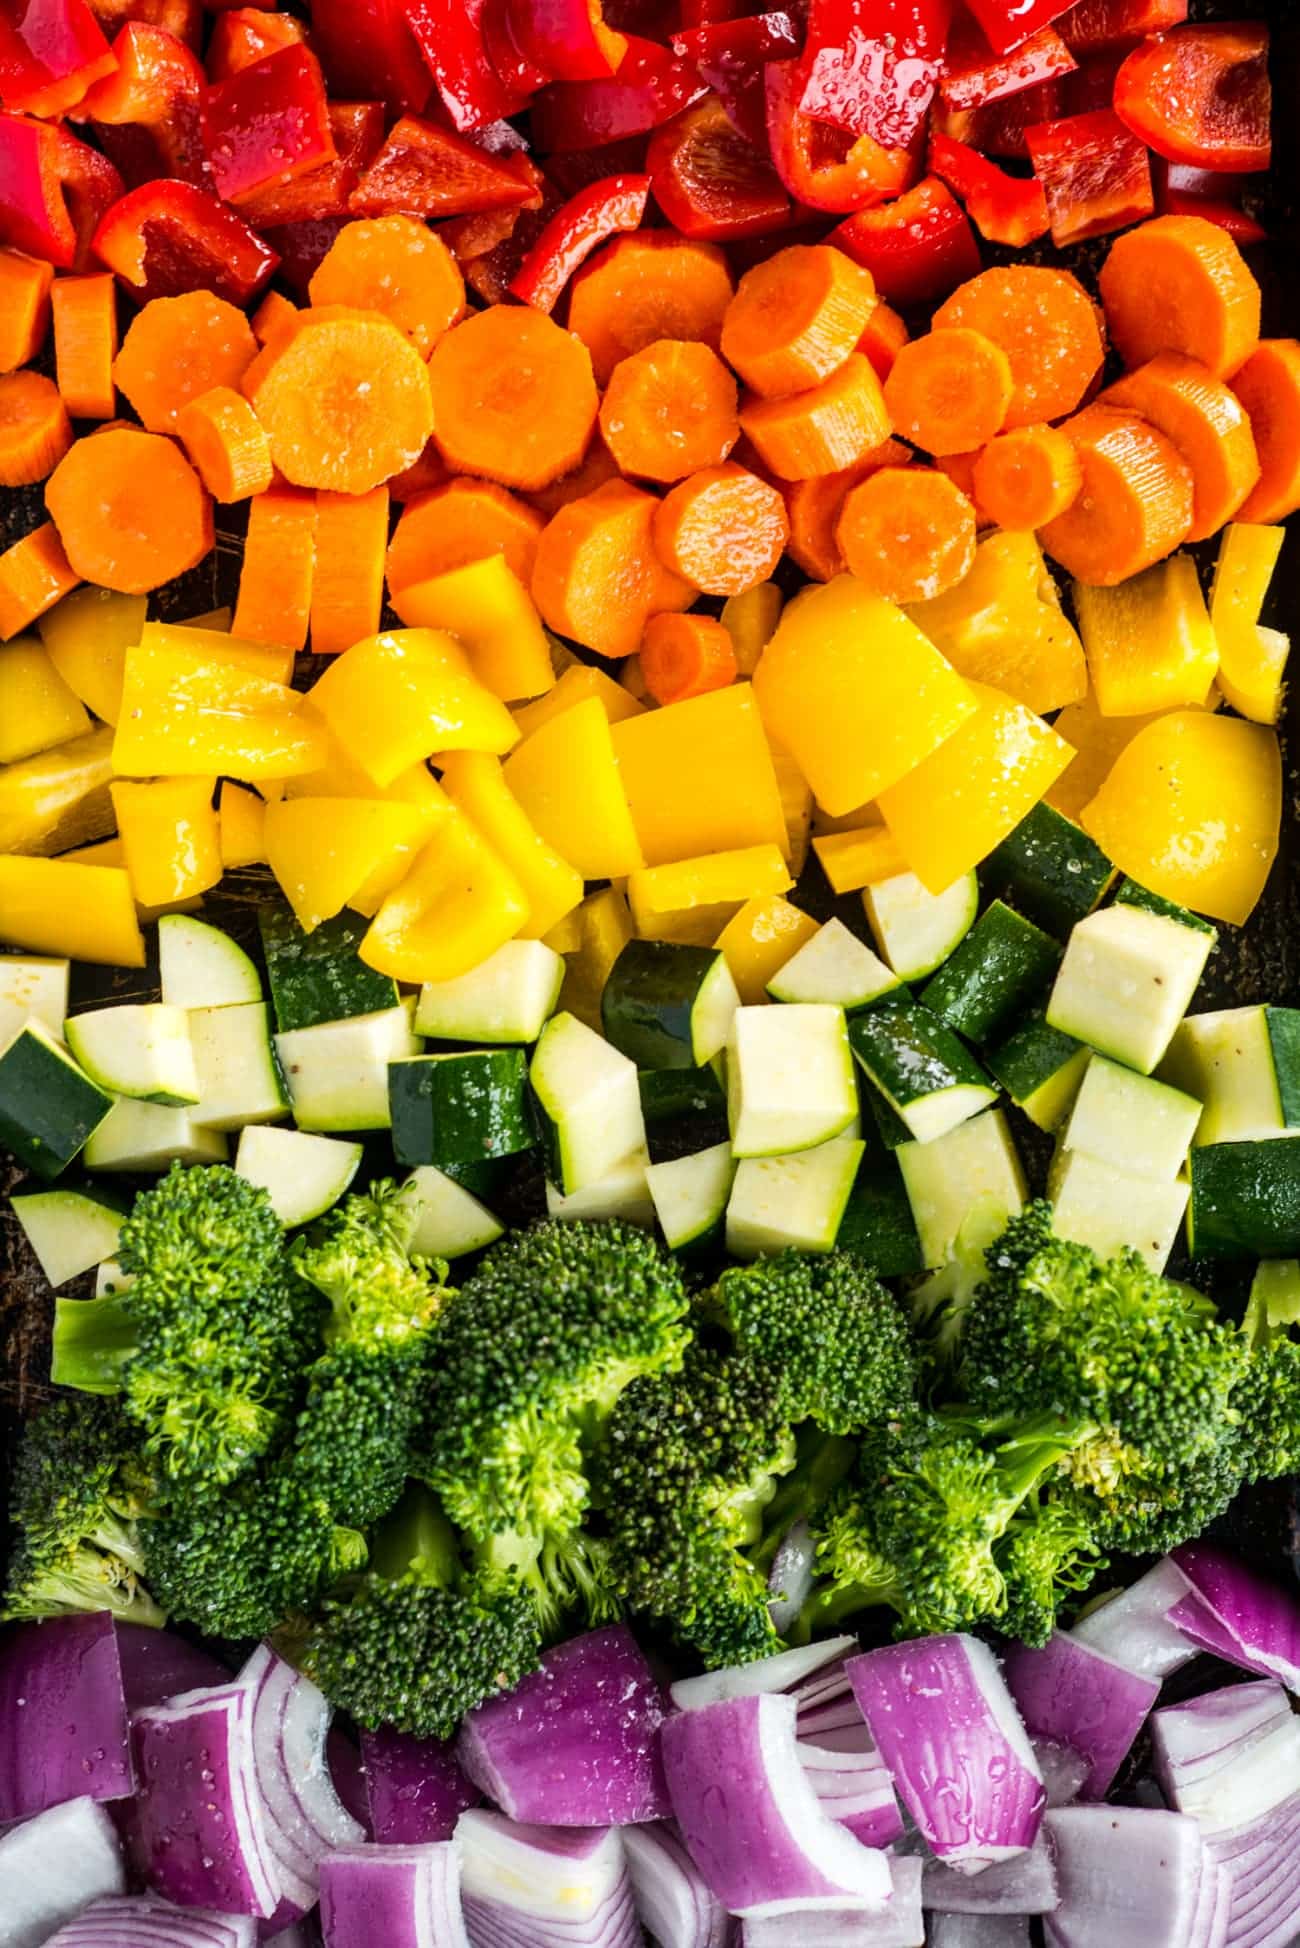 Chopped raw vegetables arranged on a platter ready to be cooked.